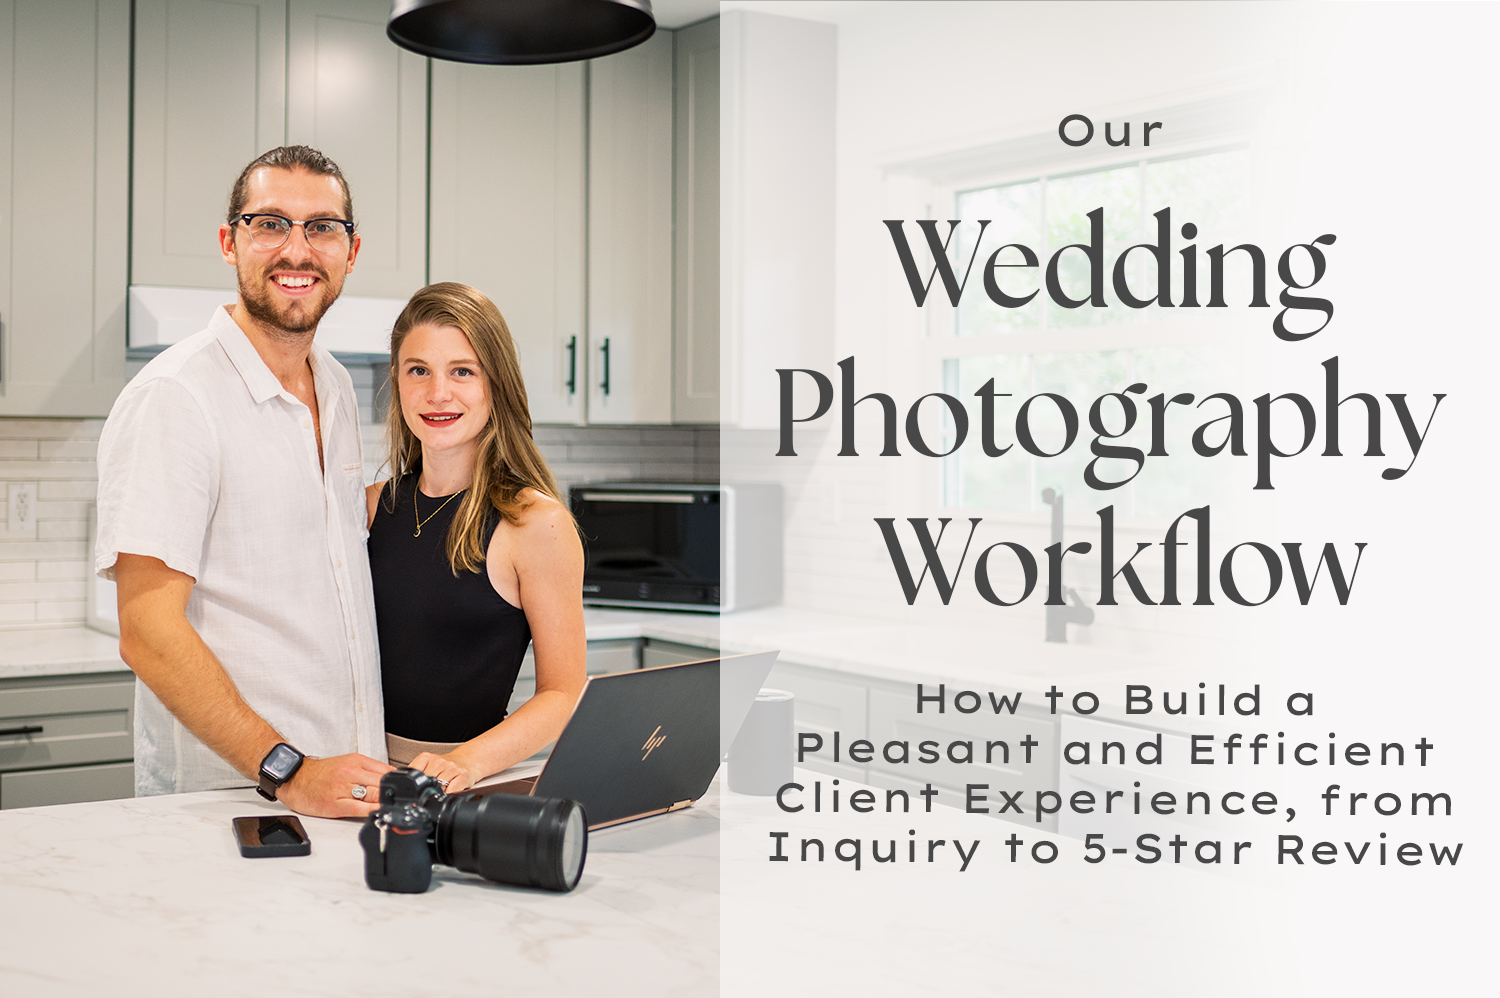 A promo image for a workshop by Hunter and Sarah Photography called, "Our Wedding Photography Workflow: How to Build a Pleasant and Efficient Client Experience, From Inquiry to Online Reviews